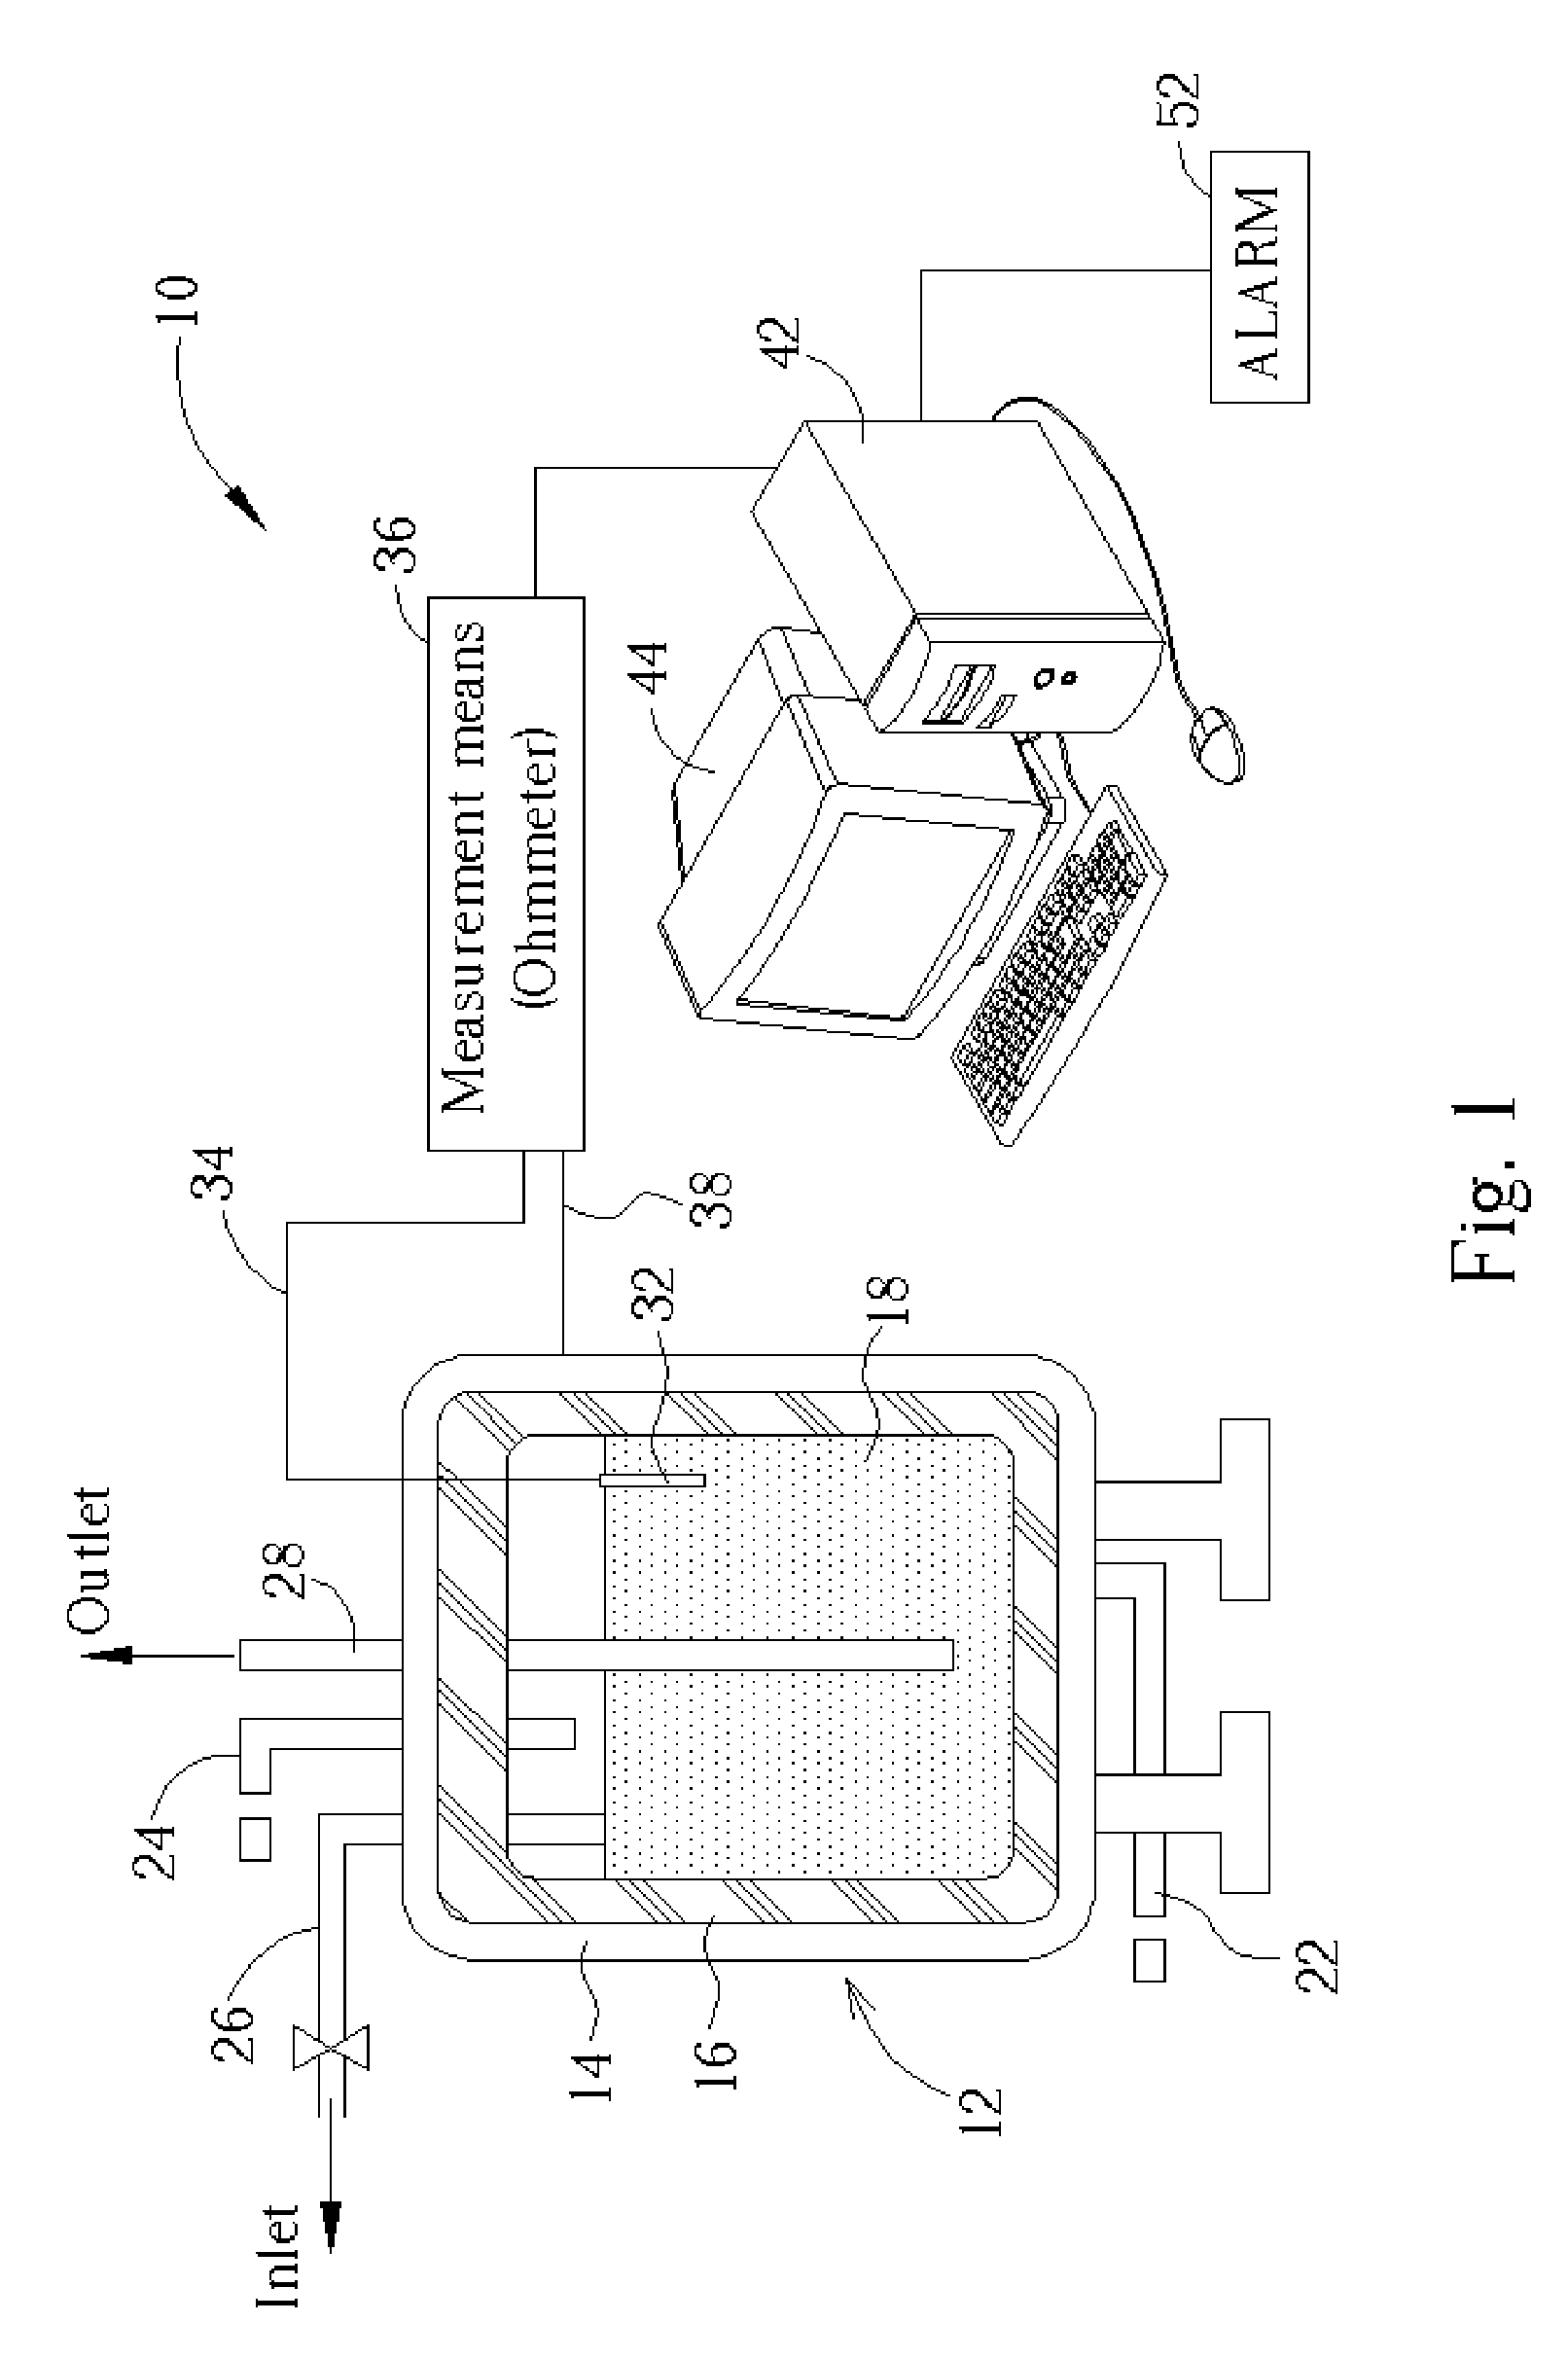 In-situ corrosion controlling system for chemical vessels or tanks